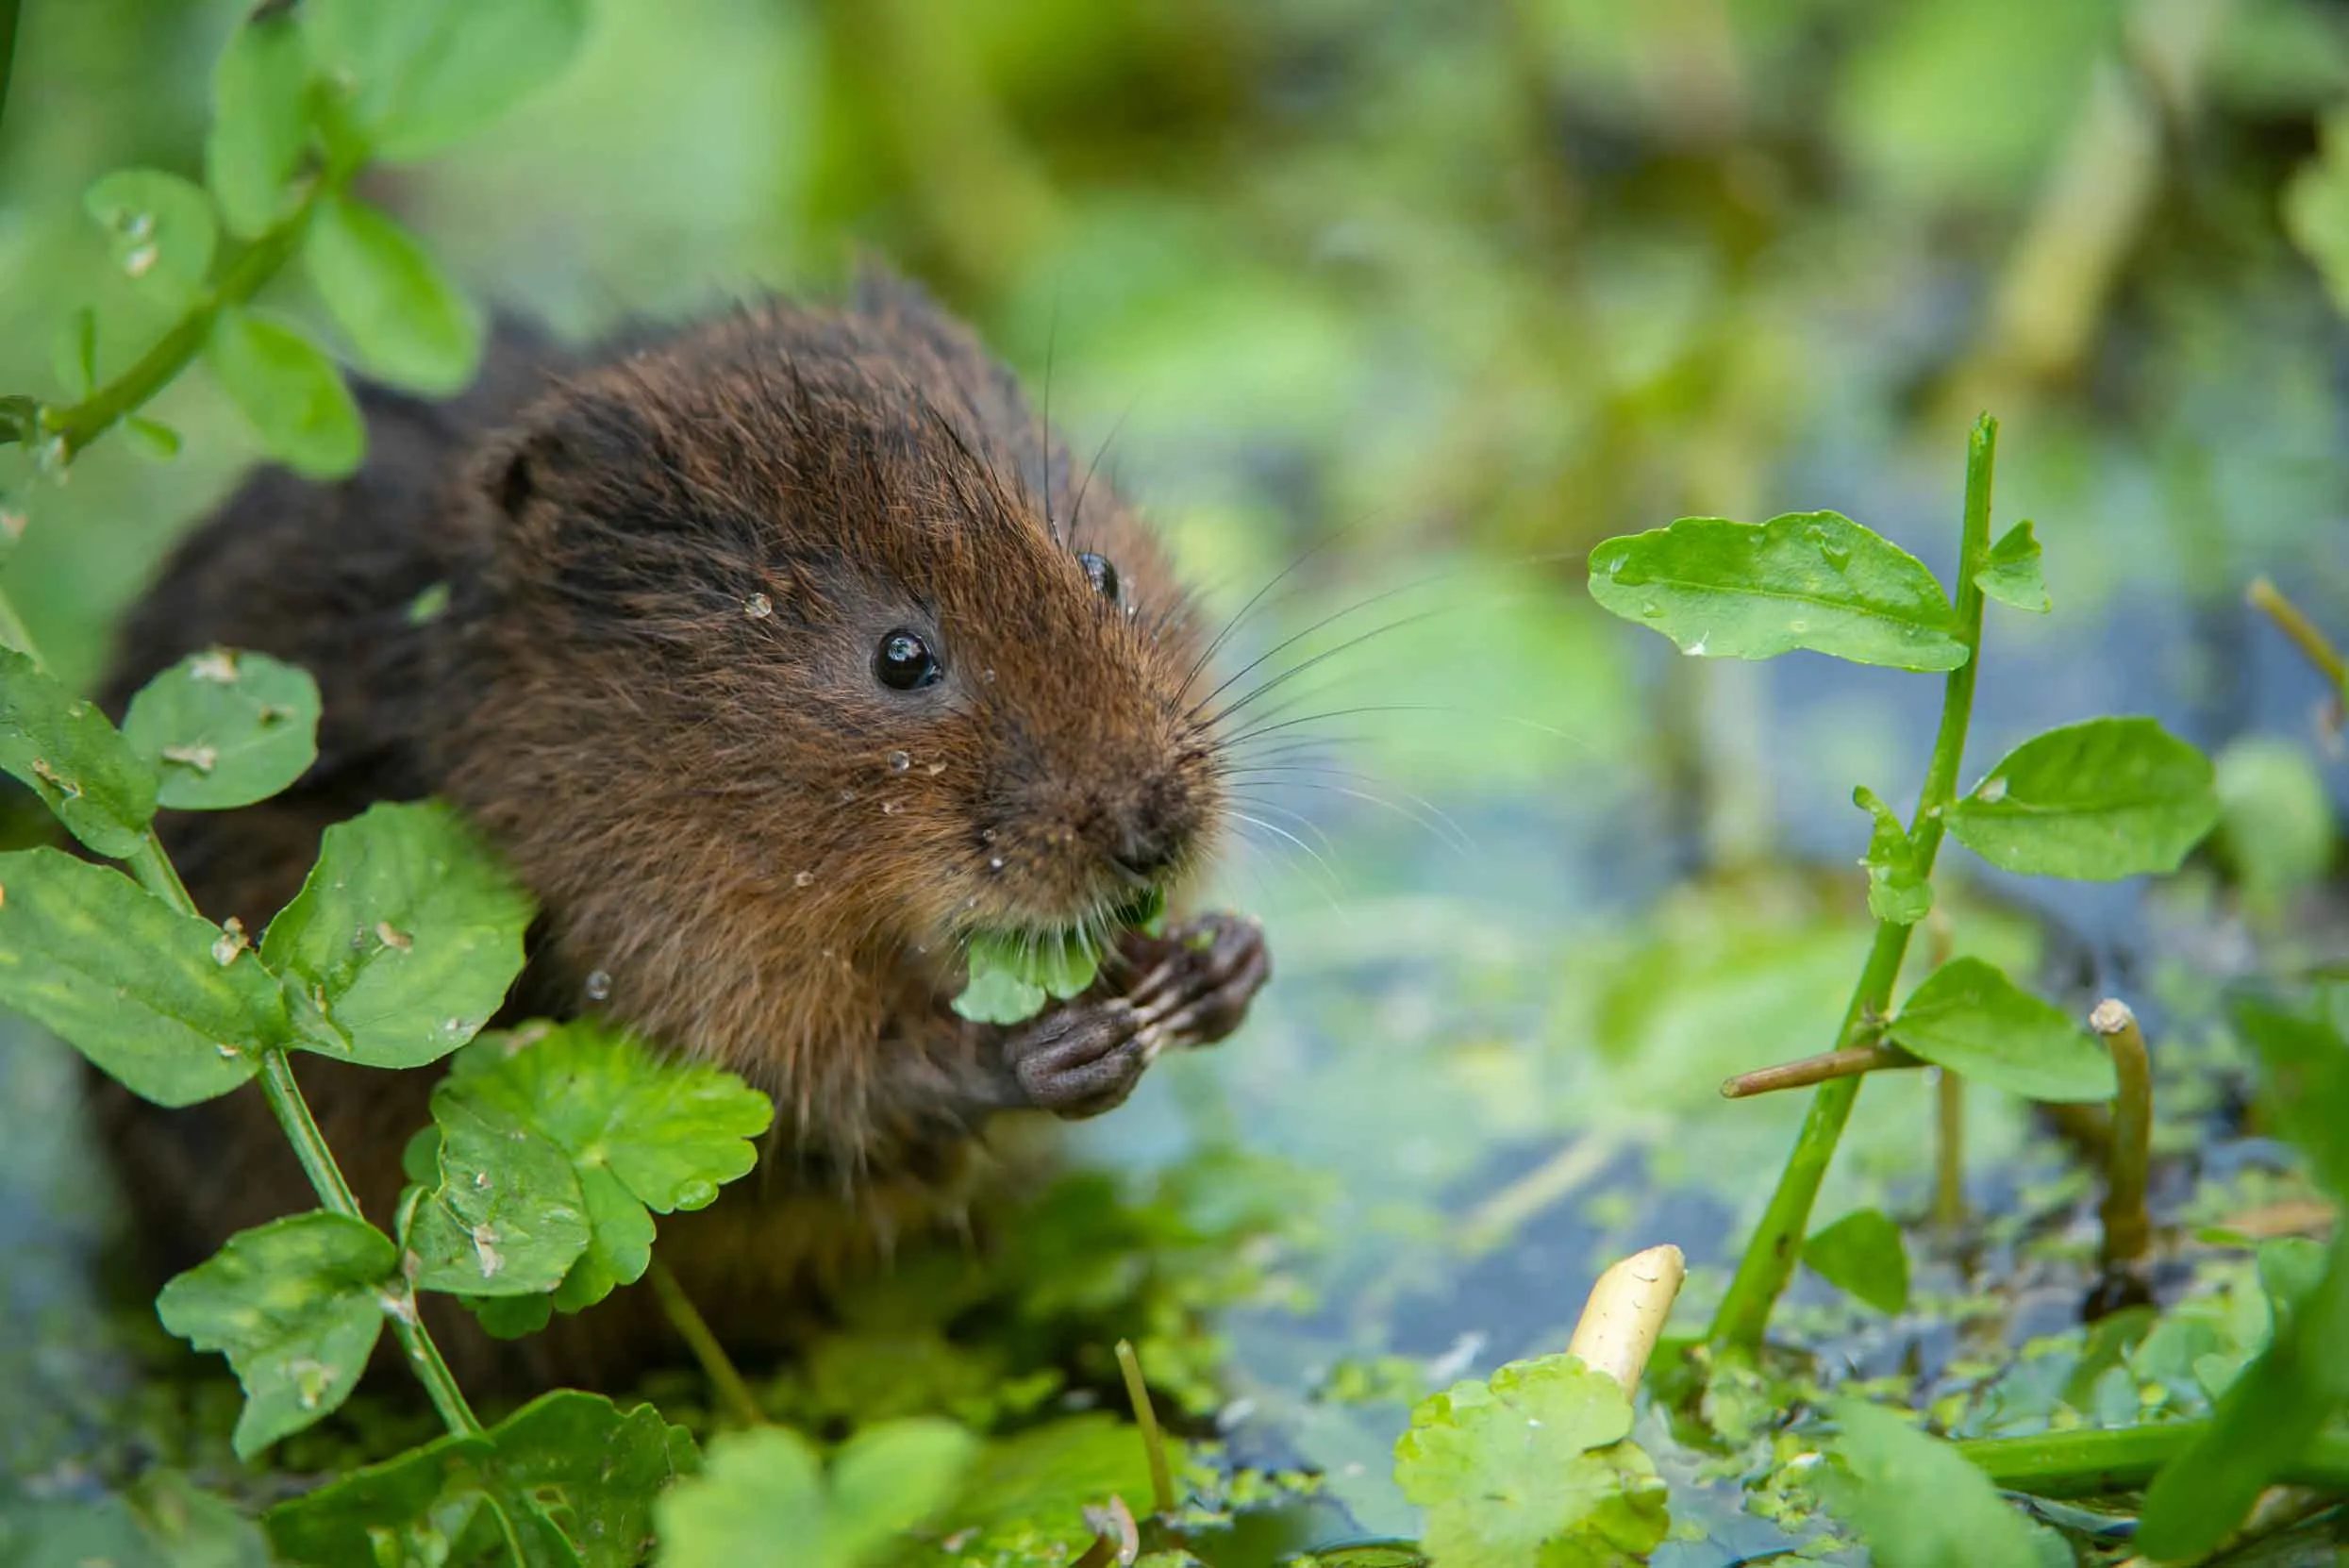 Water Vole sat in shallow water eating a leaf.